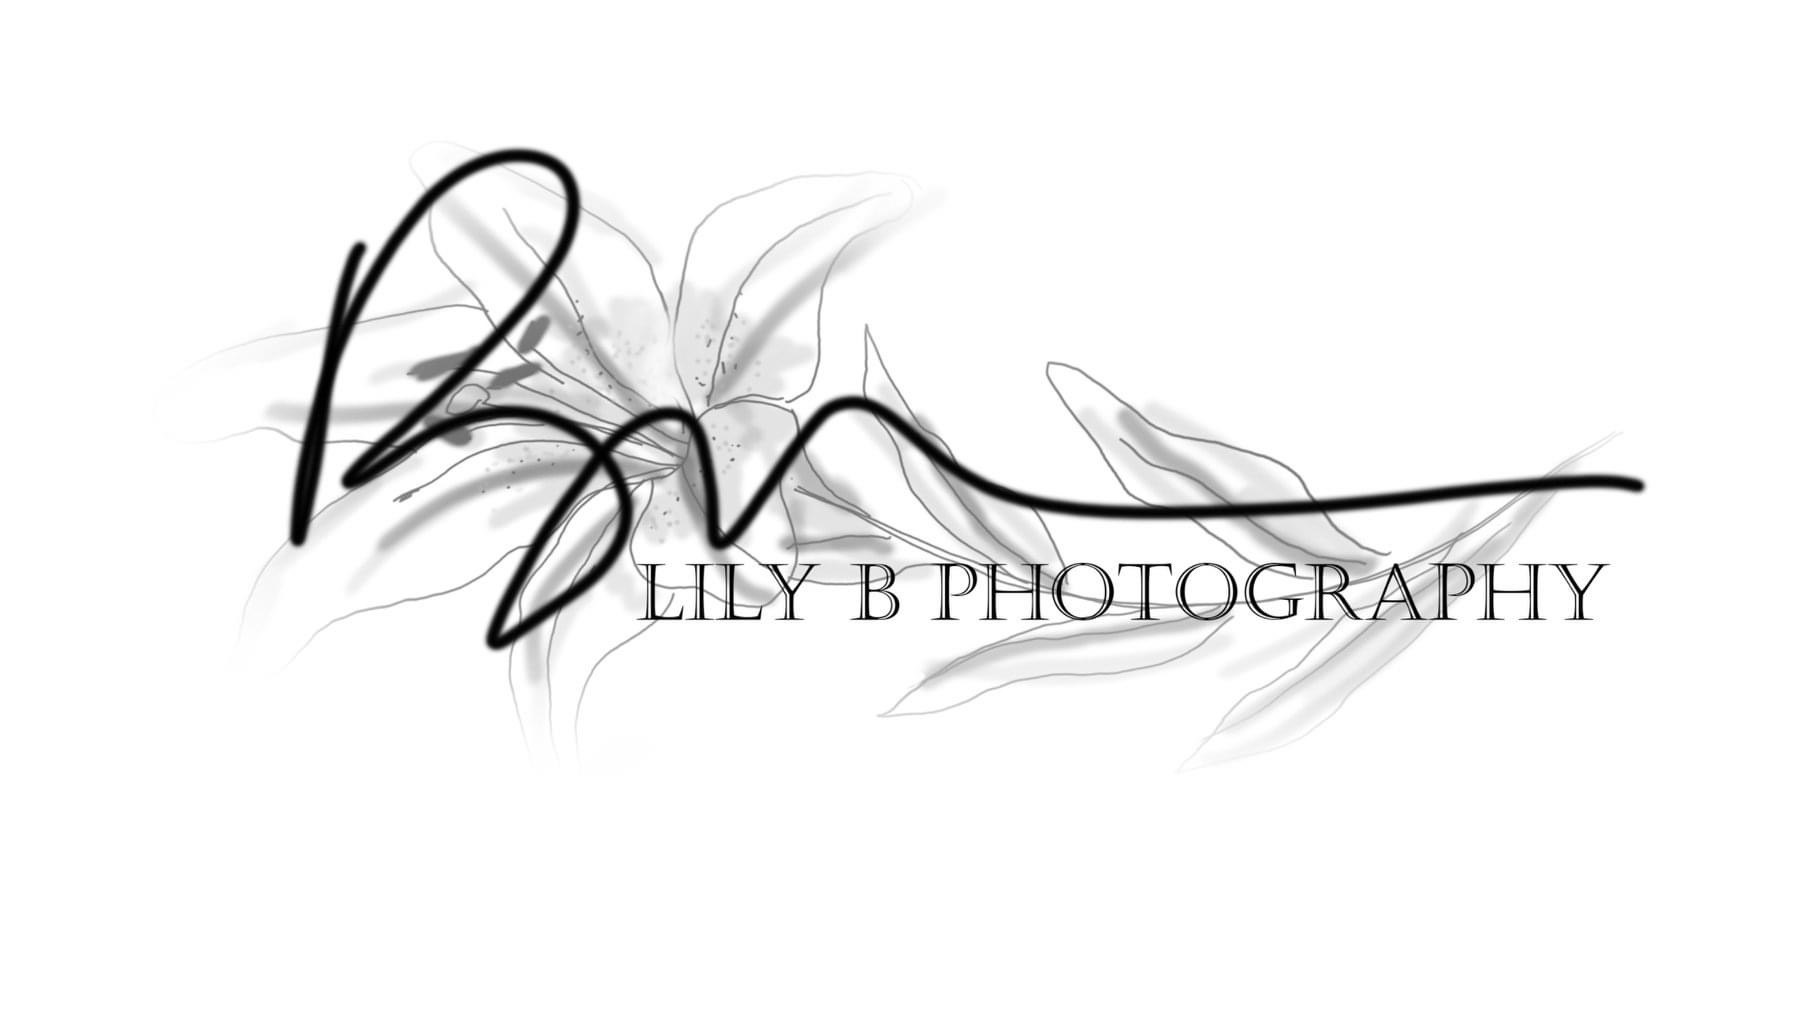 Lily B Photography 831 Fourth Ave NW, Melrose Minnesota 56352